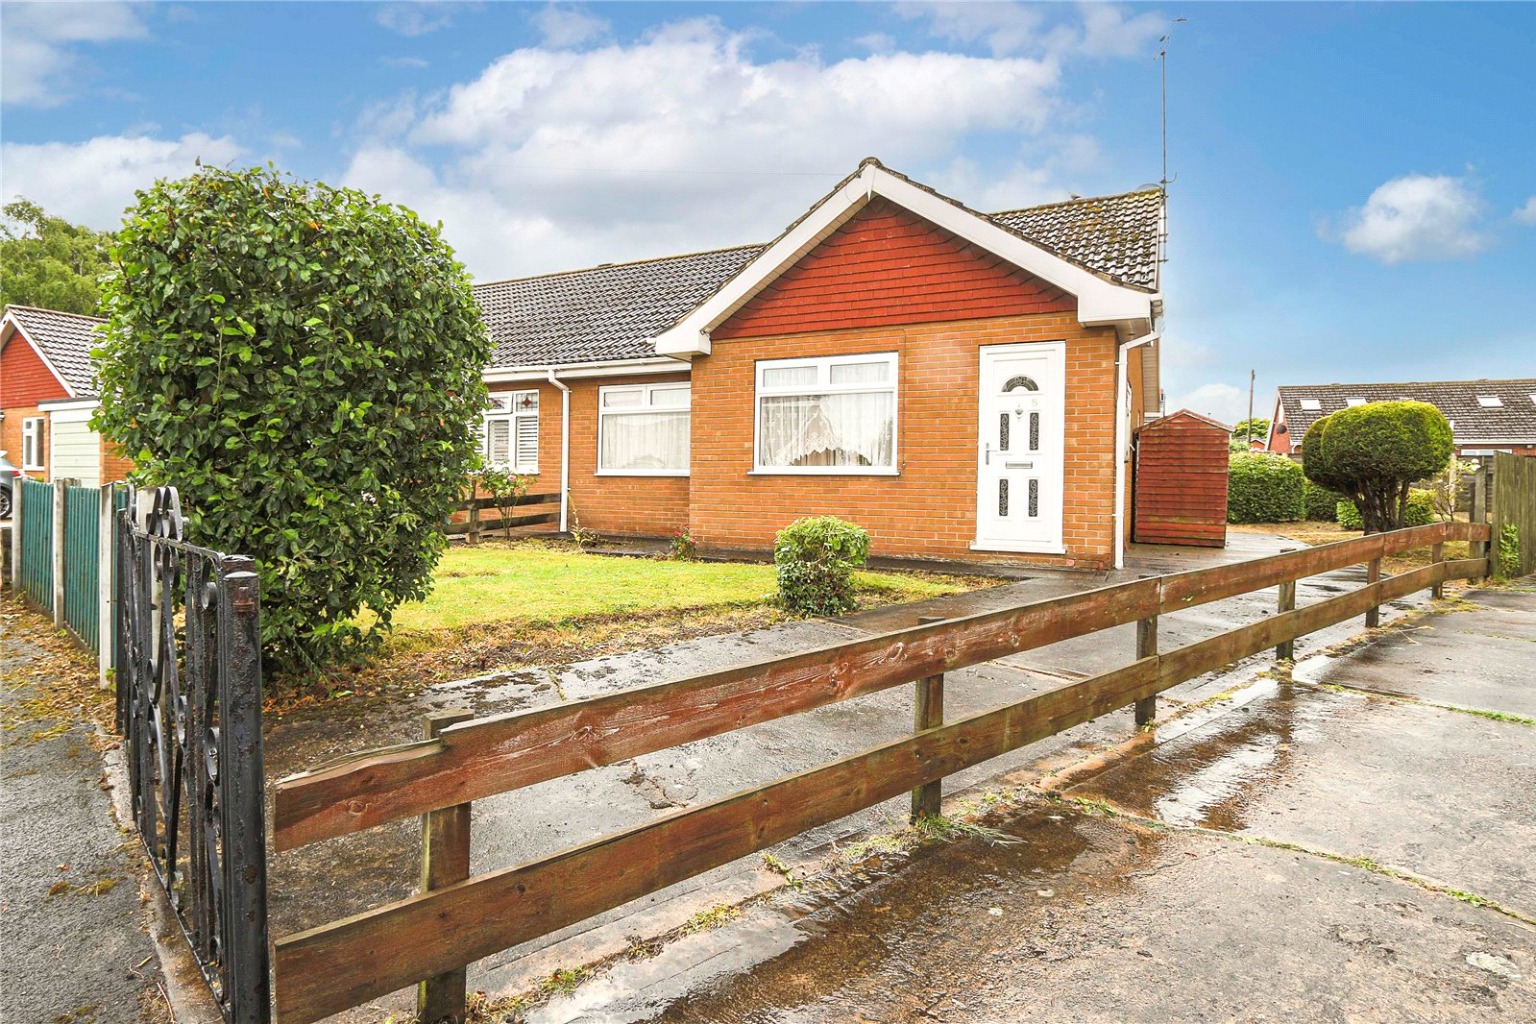 2 bed semi-detached bungalow for sale - Property Image 1